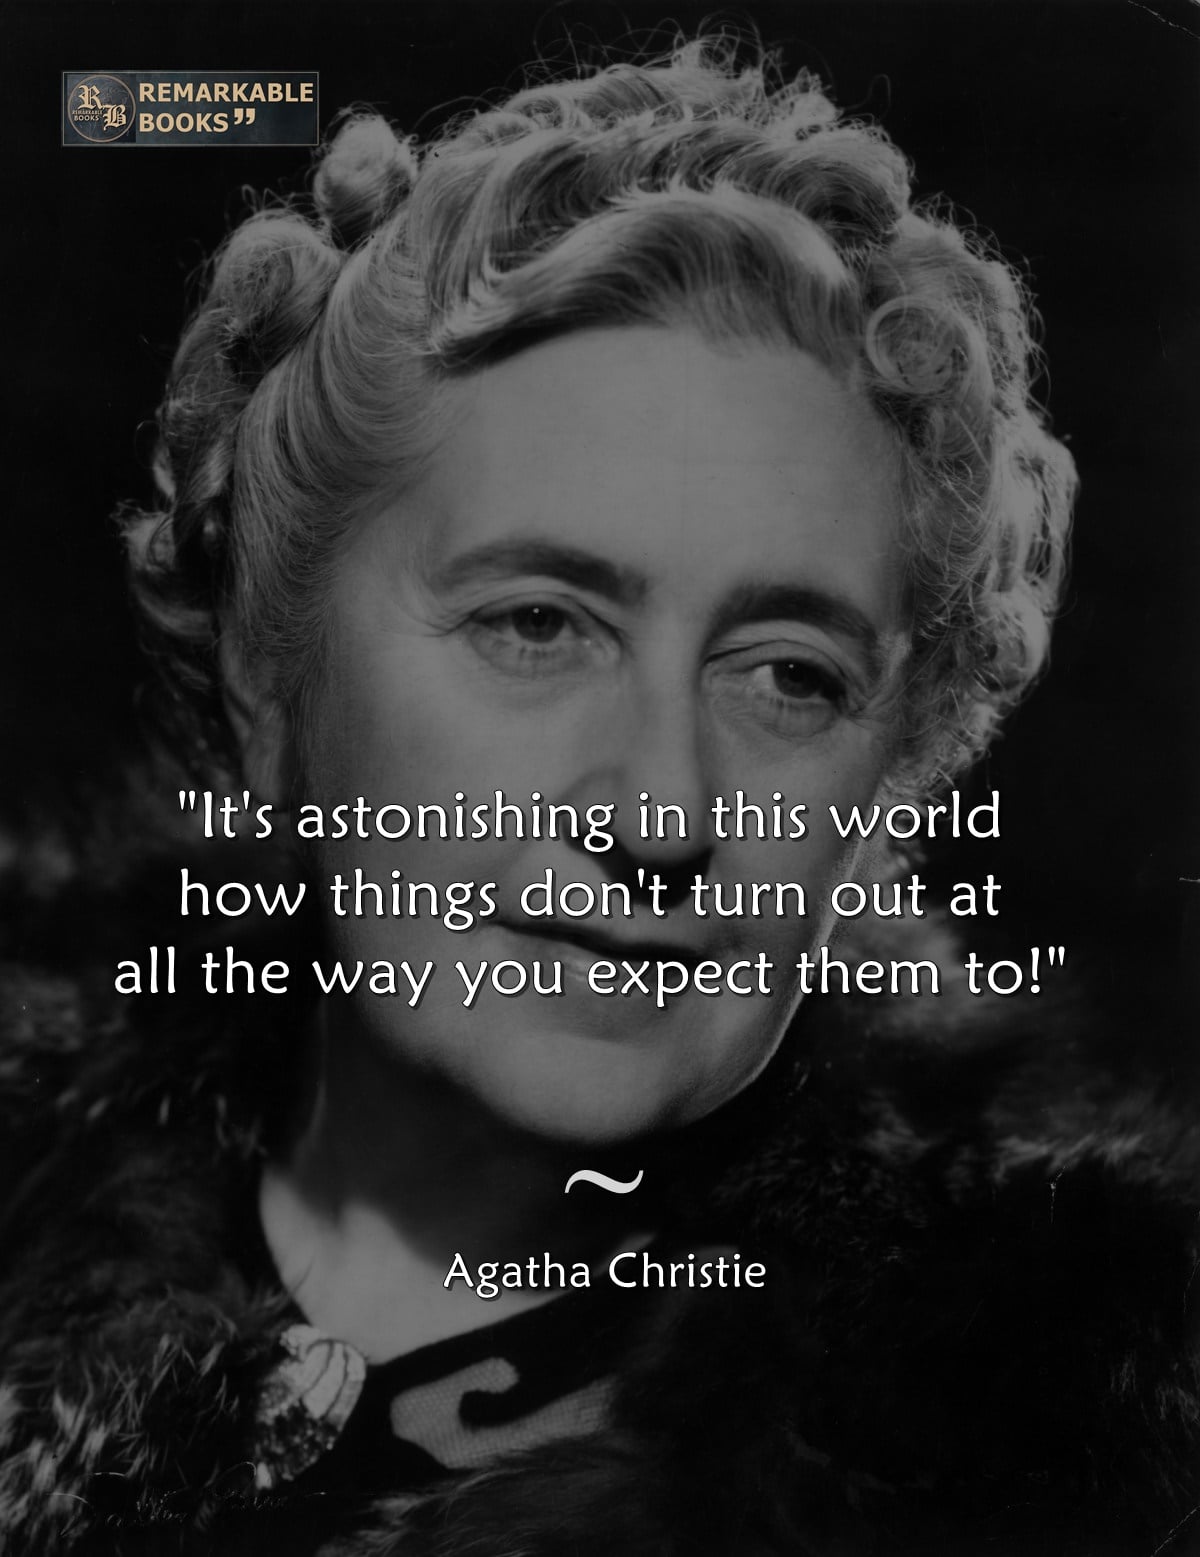 It’s astonishing in this world how things don’t turn out at all the way you expect them to…. Agatha Christie